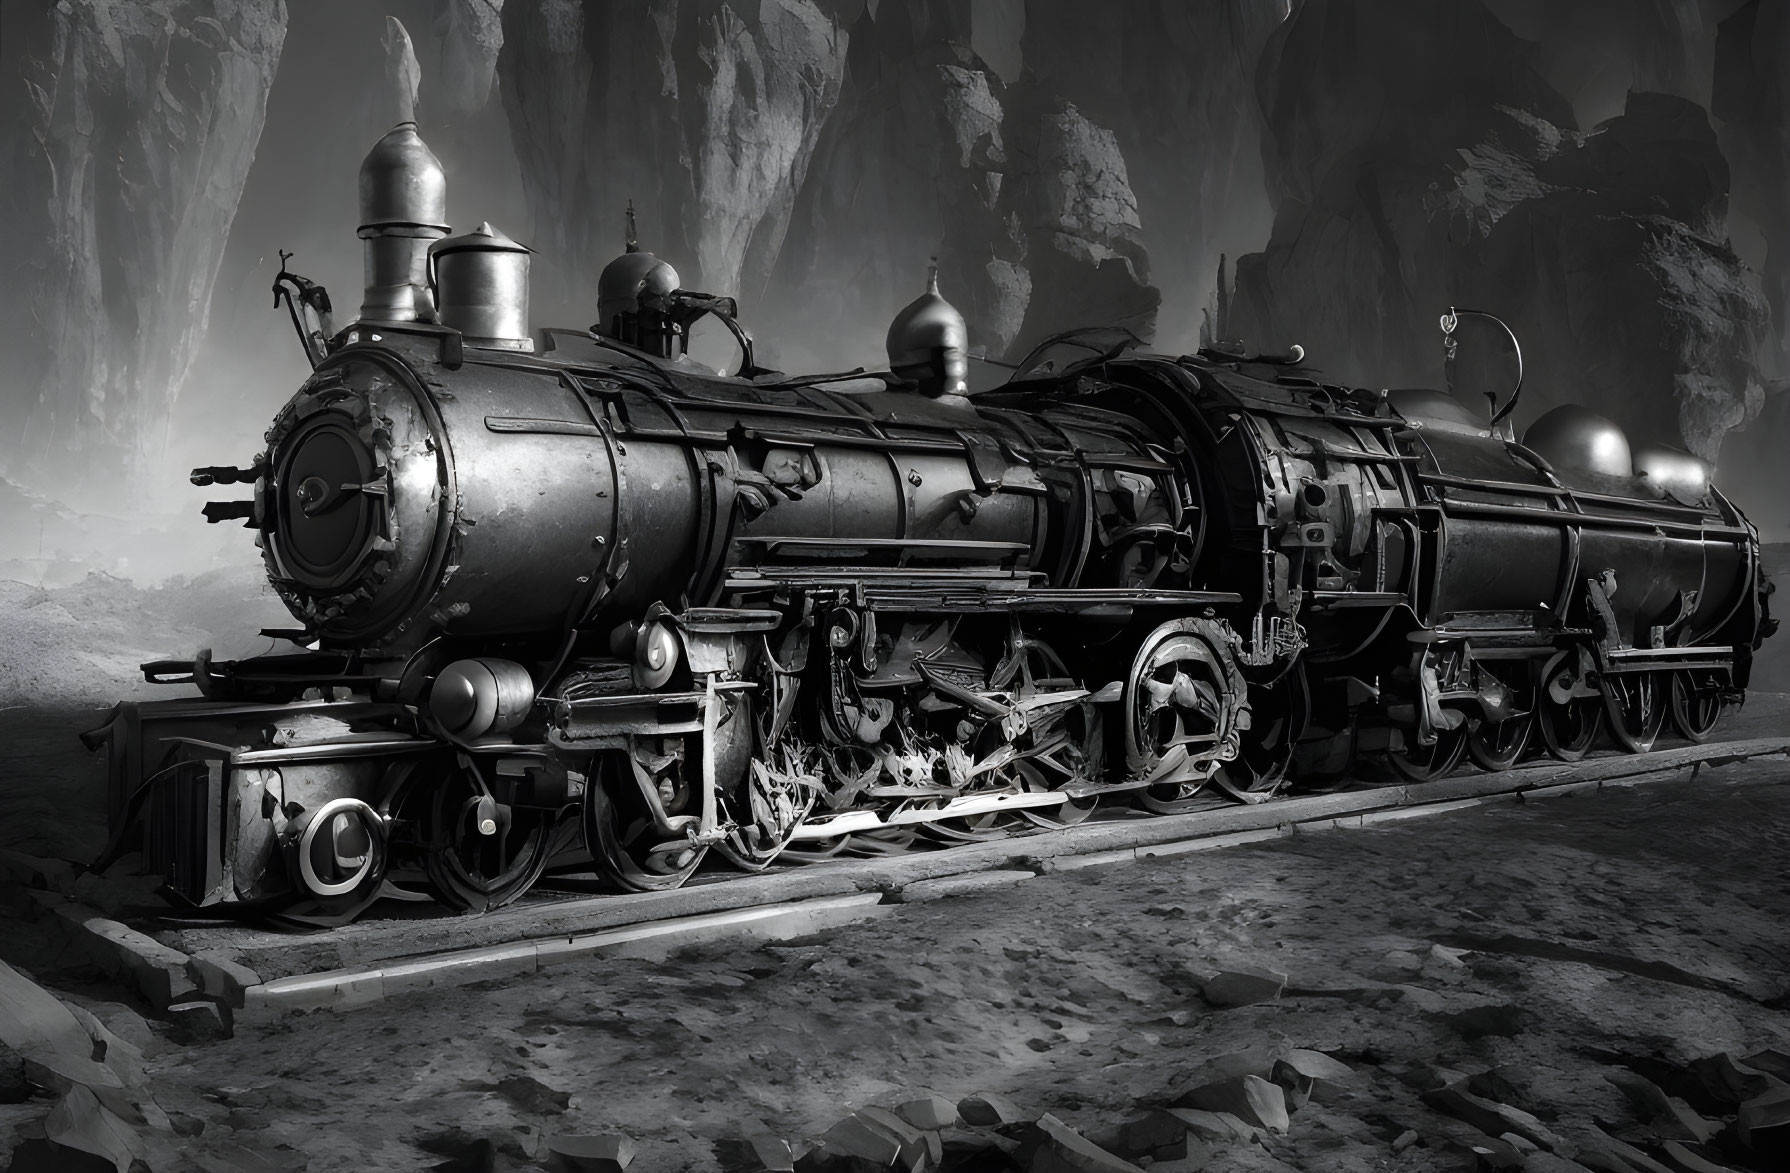 Vintage steam locomotive on tracks with intricate mechanical details against rugged cliffs.